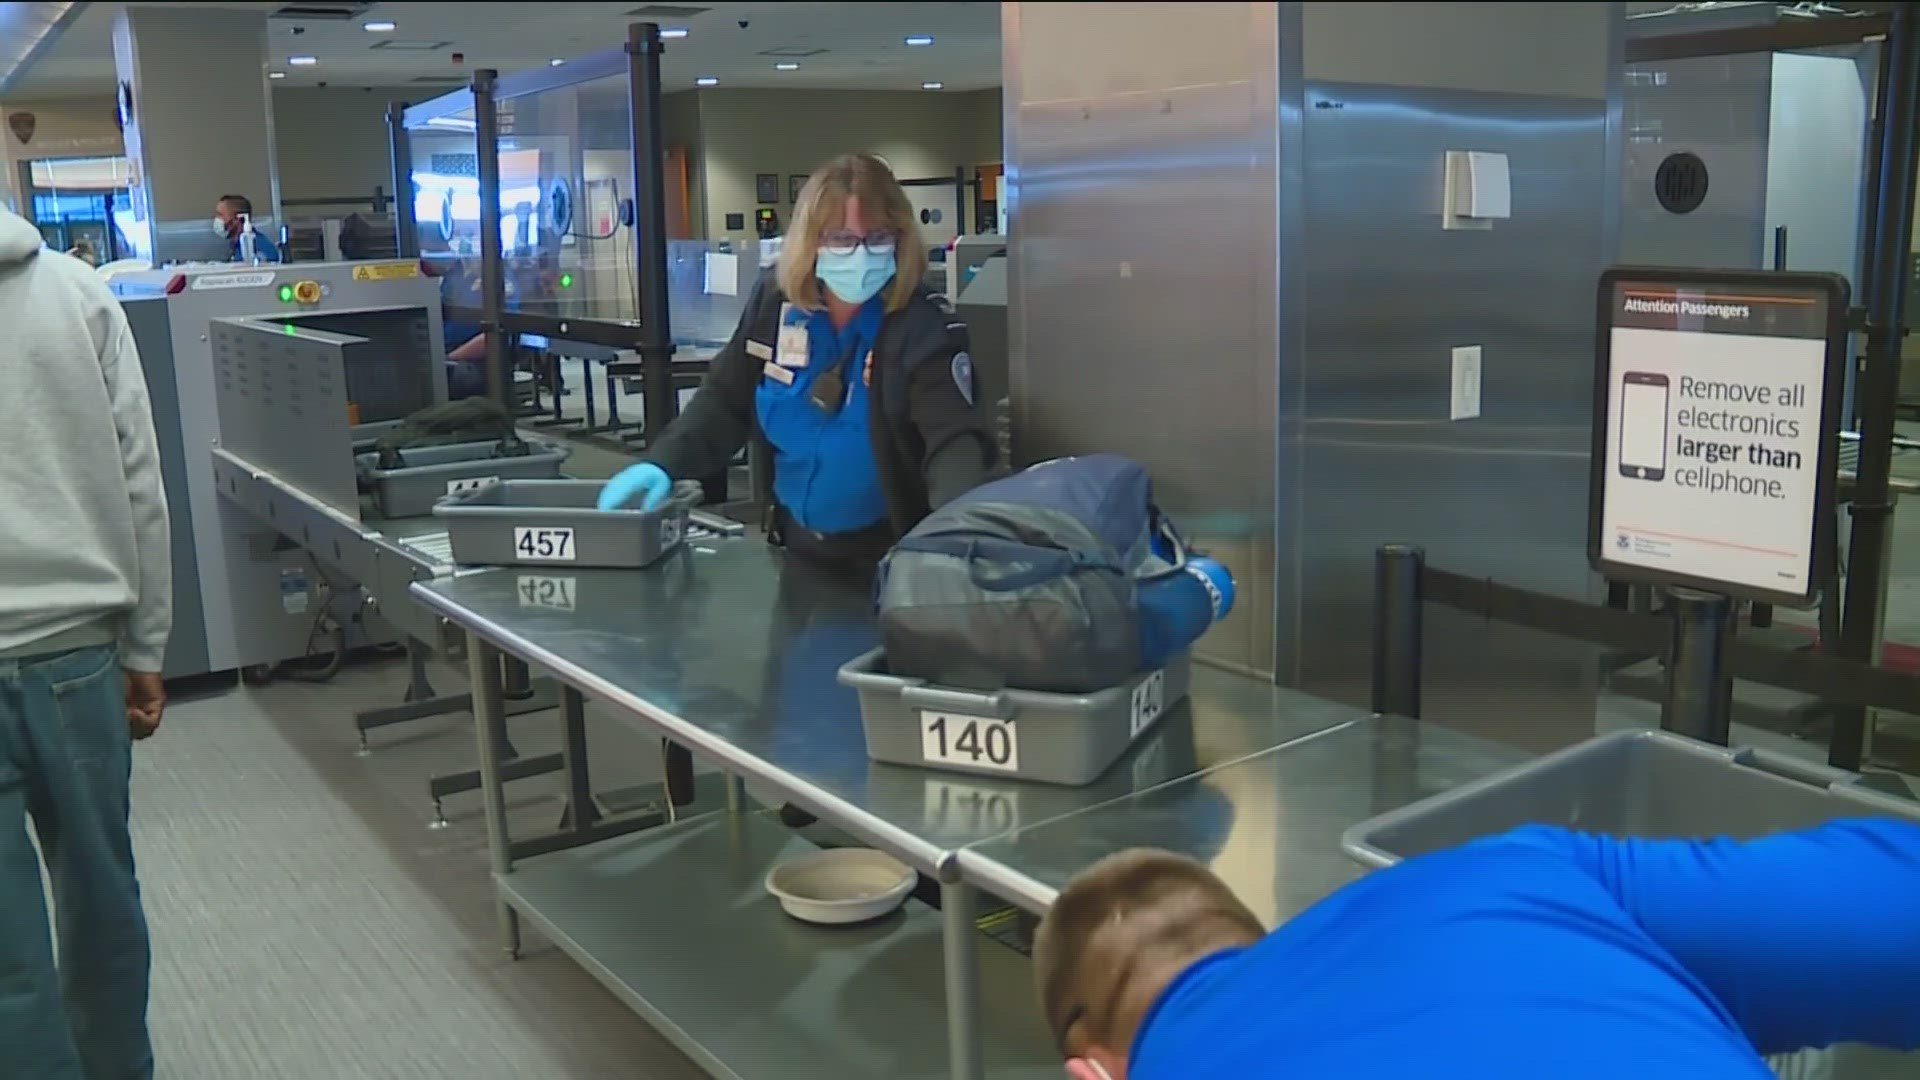 TSA officials find 2 guns in carry-on luggage at BOI | ktvb.com